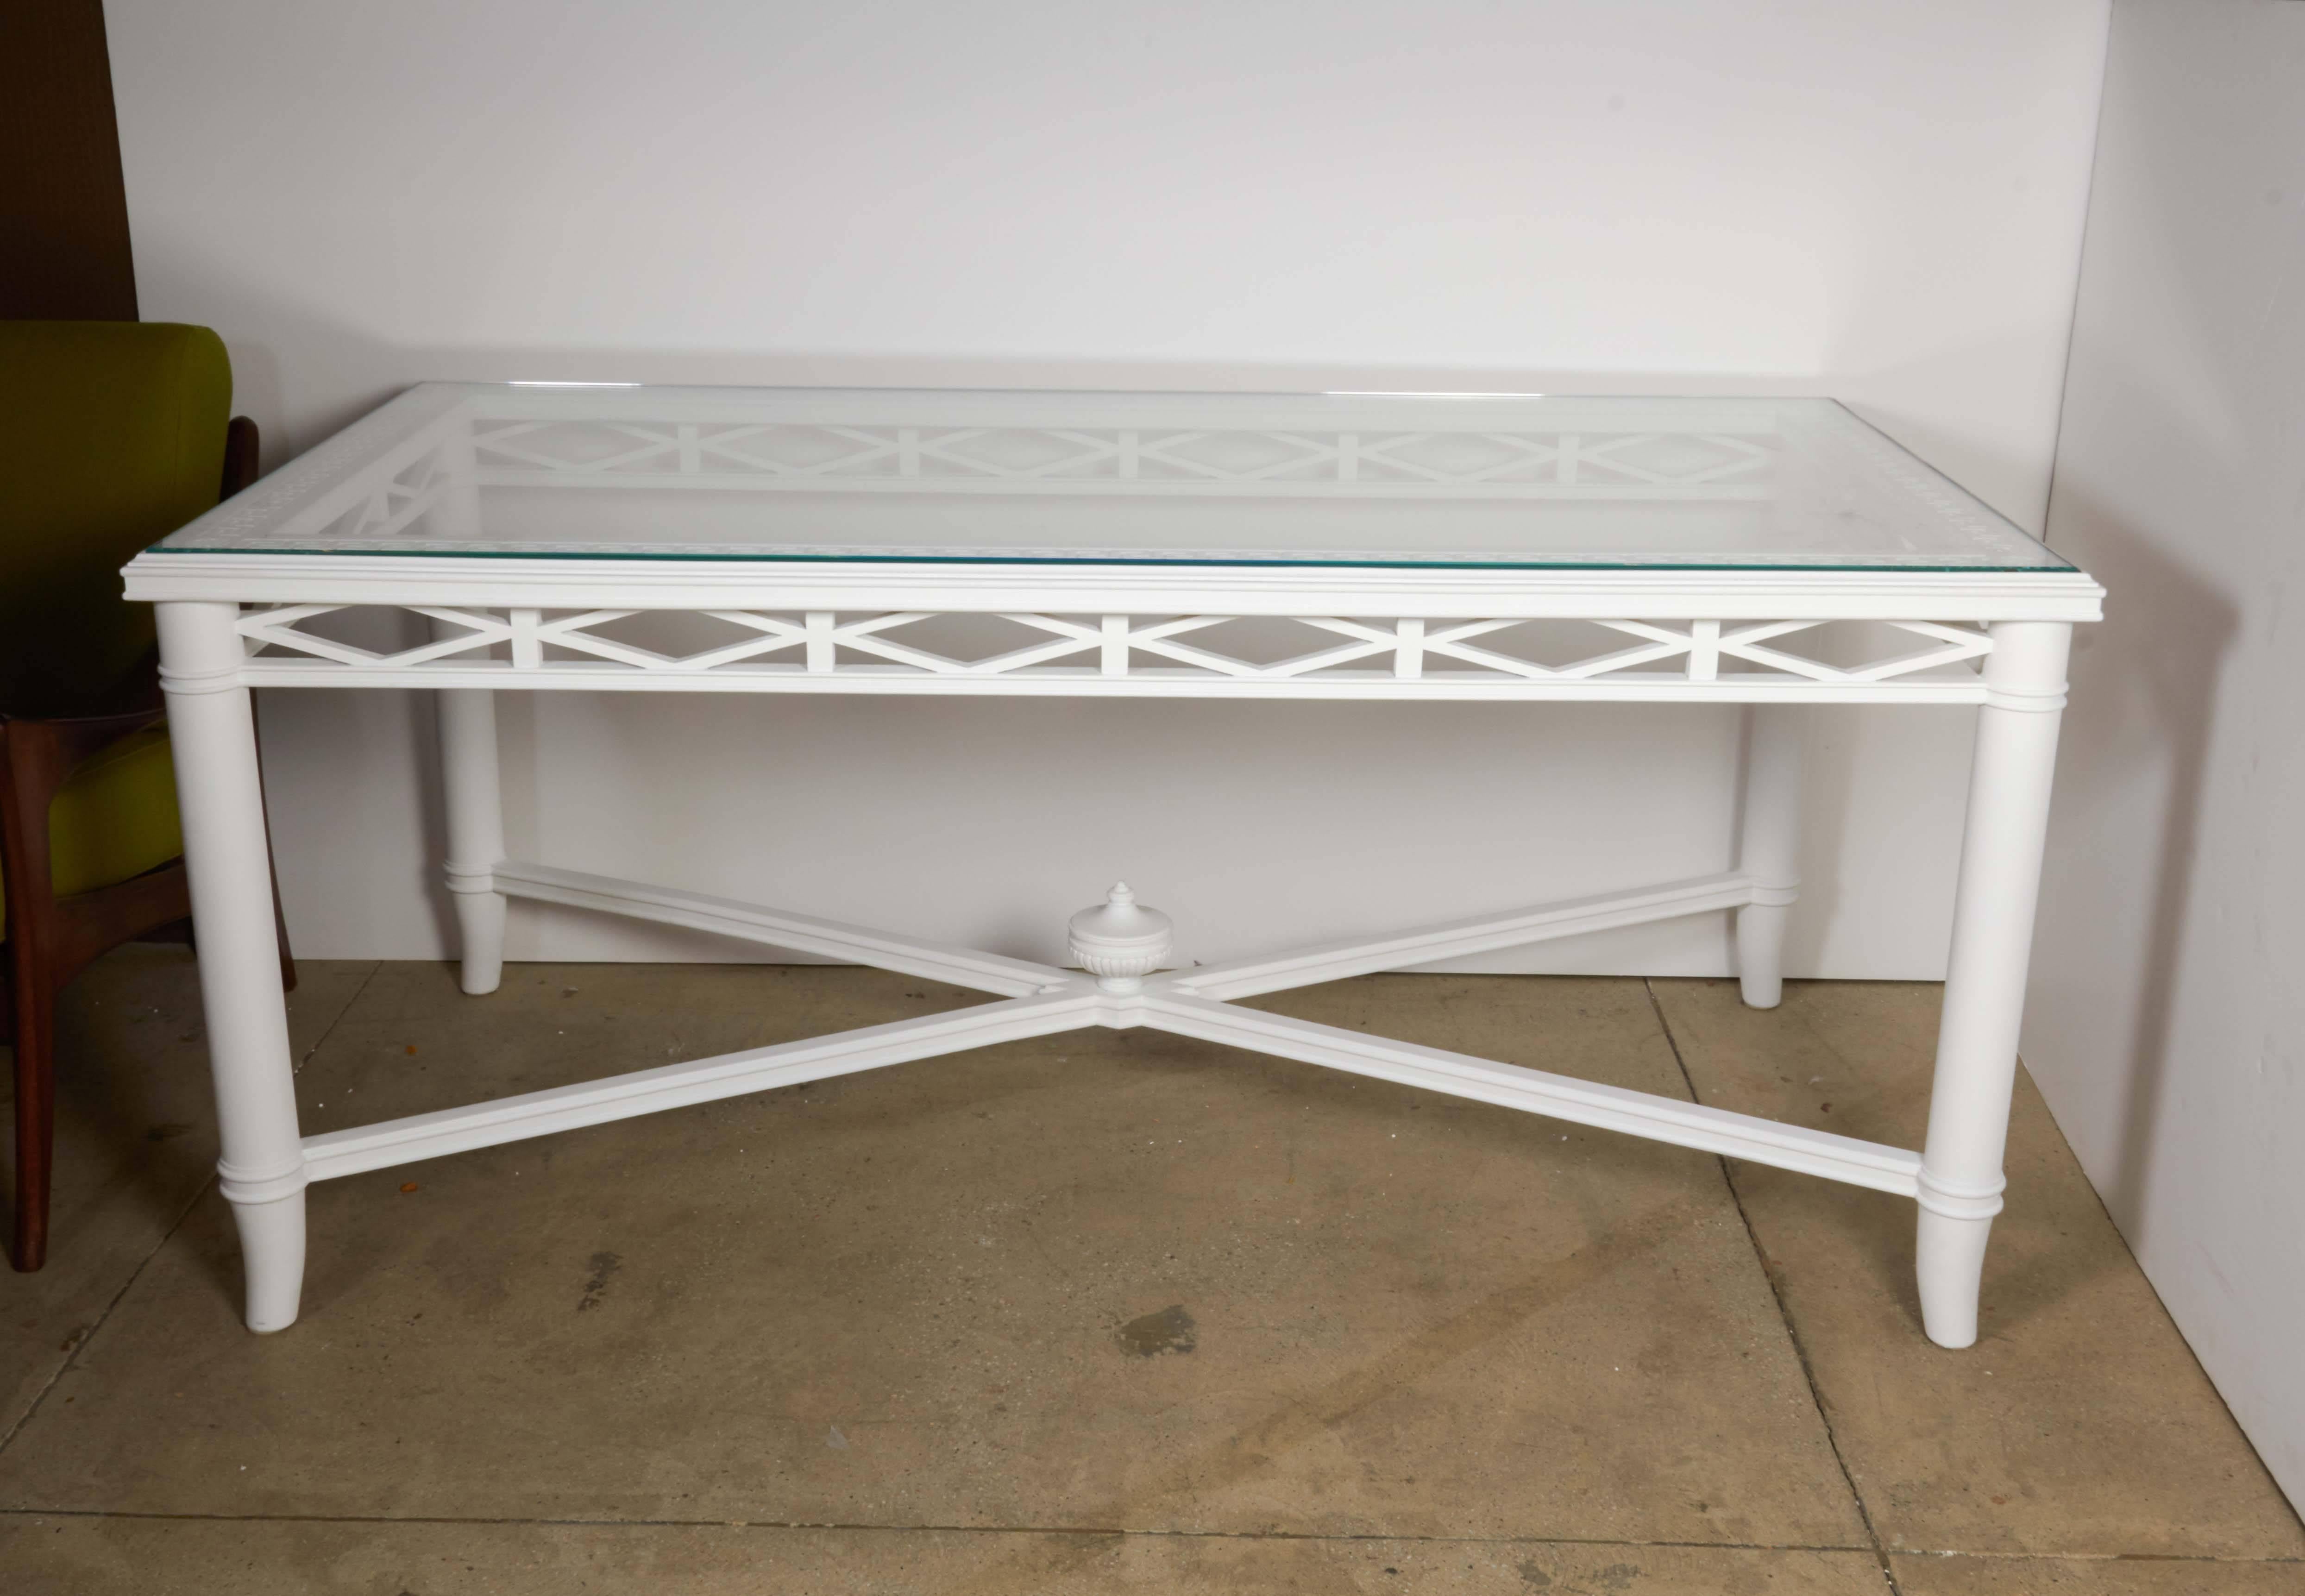 This table could be used as a desk.
The table has a new glass top.